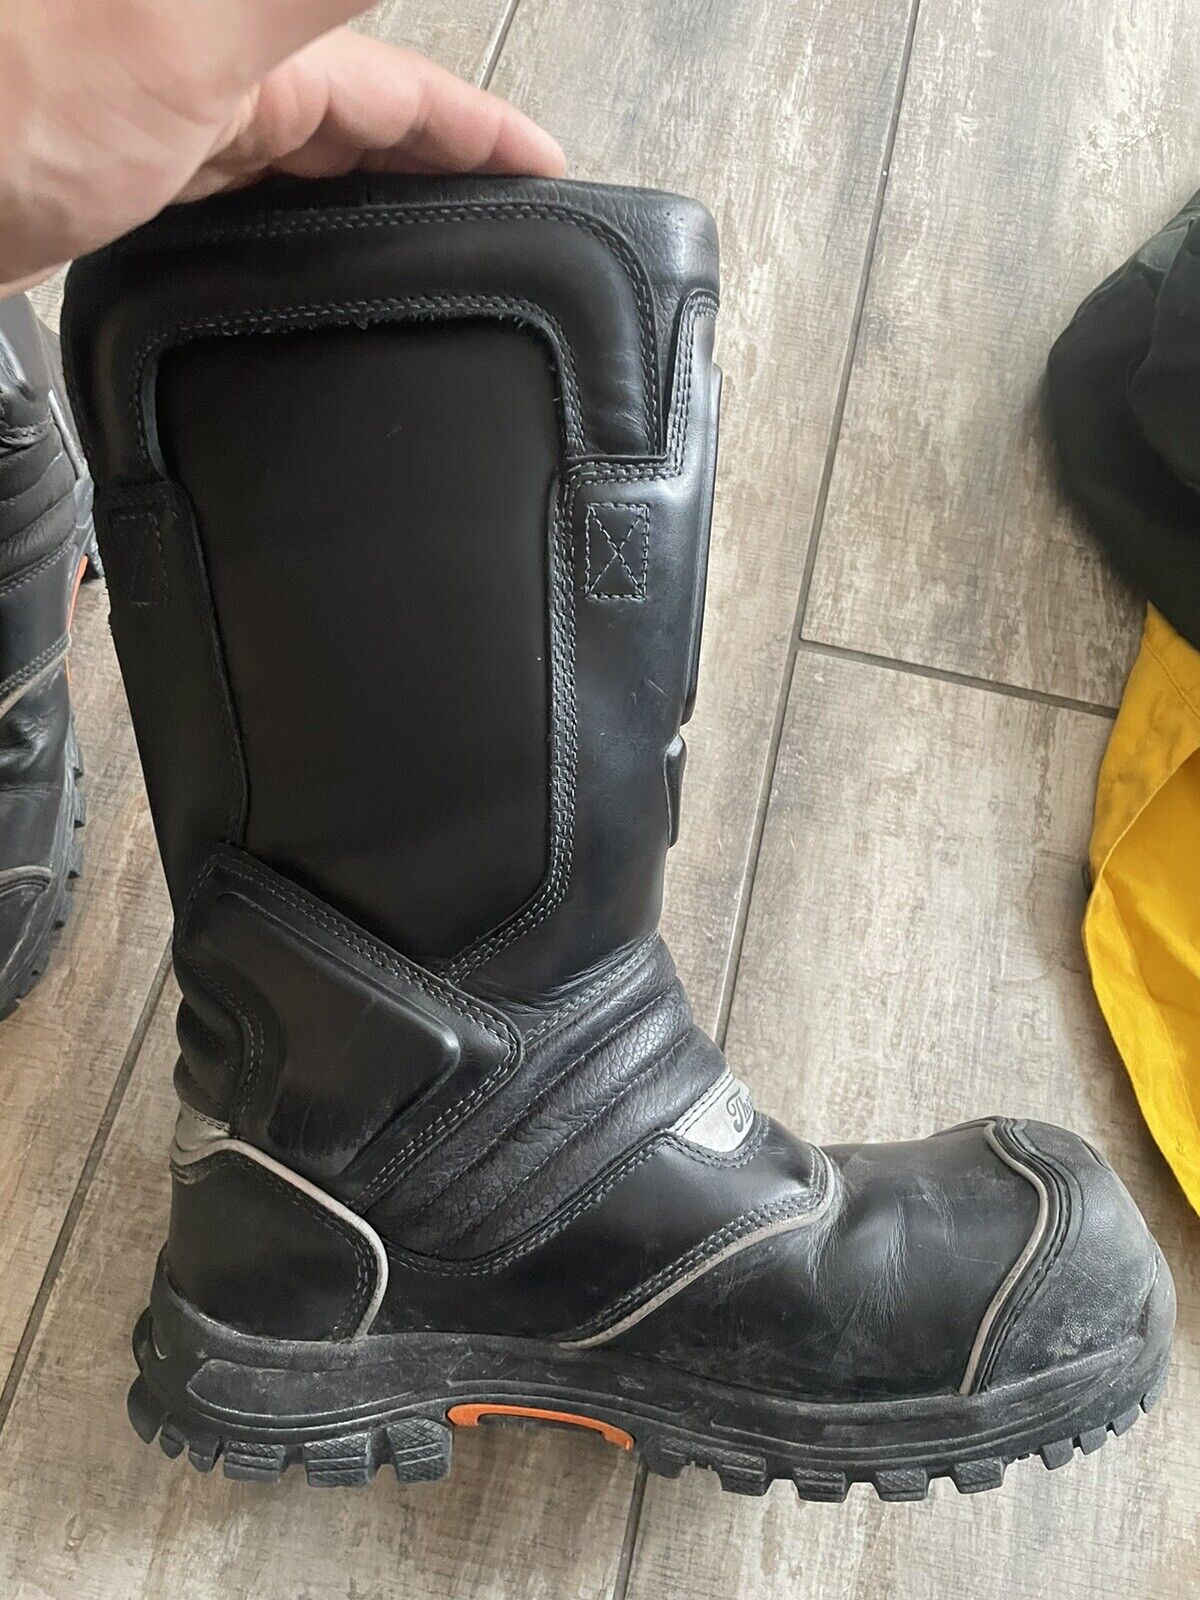 Structural firefighter boots Size 12